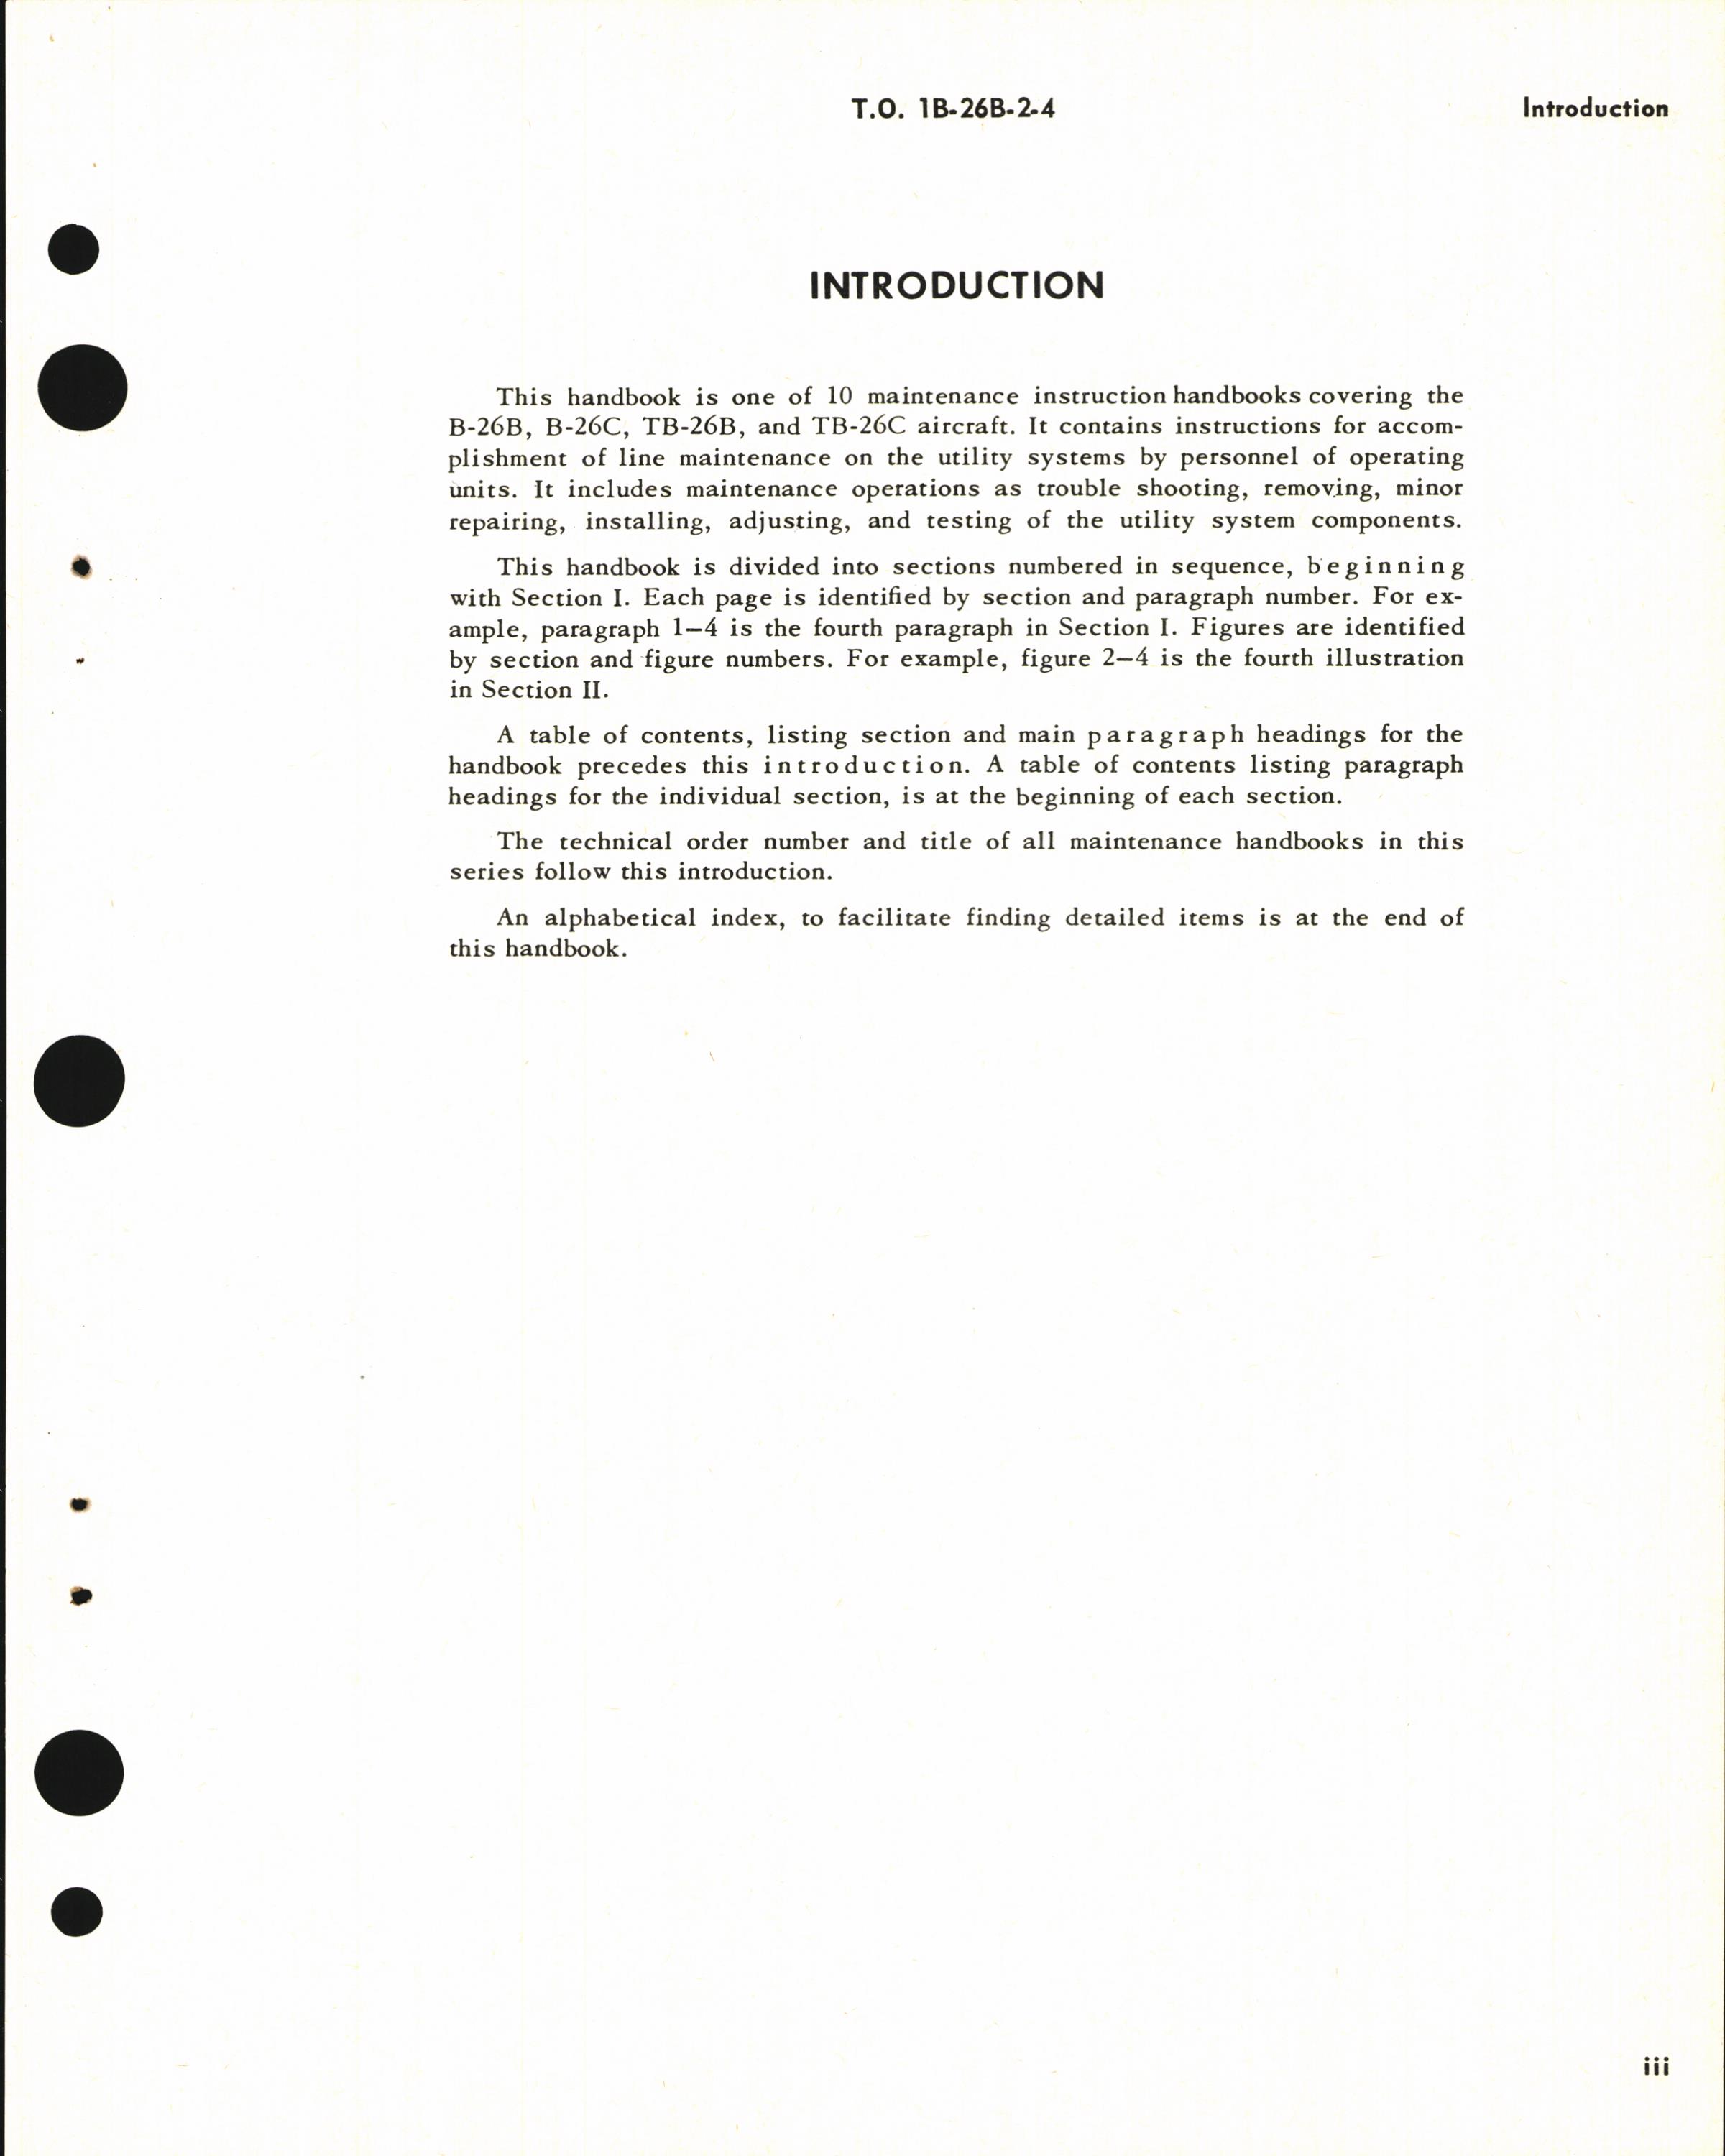 Sample page 5 from AirCorps Library document: Maintenance Instructions for B-26B, B-26C, TB-26B, TB-26C, and JD-1 - Utility Systems